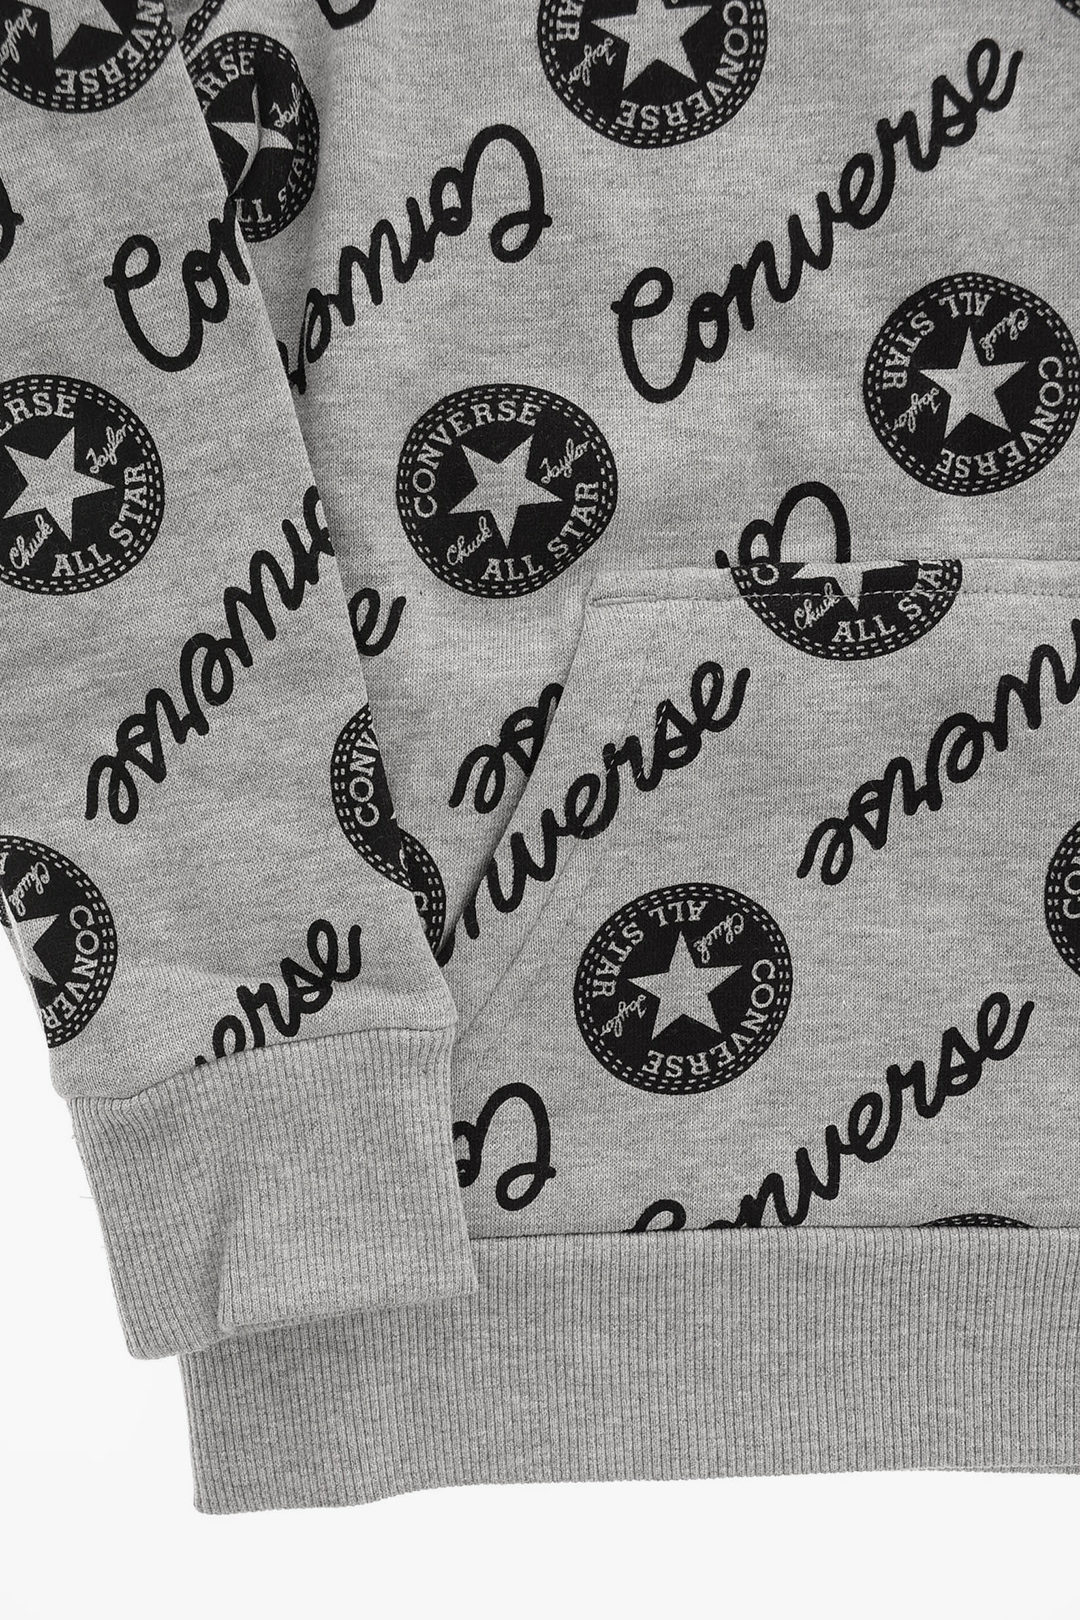 Converse KIDS Sweatshirt All Glamood Over boys ALL - Logo Hood with Outlet STAR